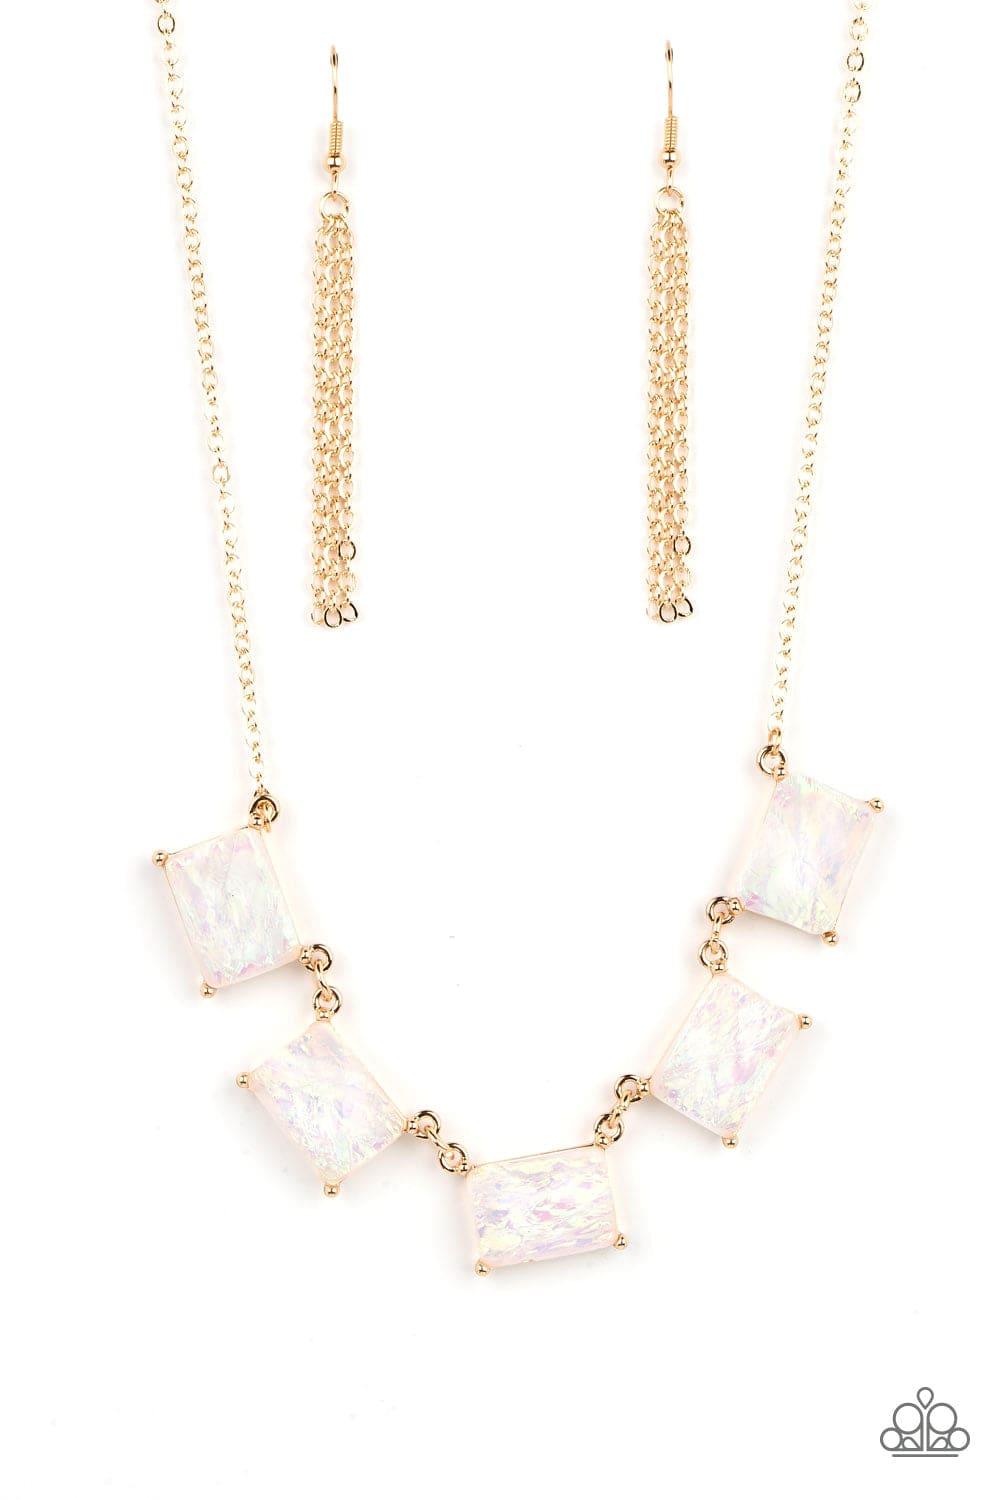 Paparazzi Accessories - Opalescent Oblivion - Gold Necklace - Bling by JessieK